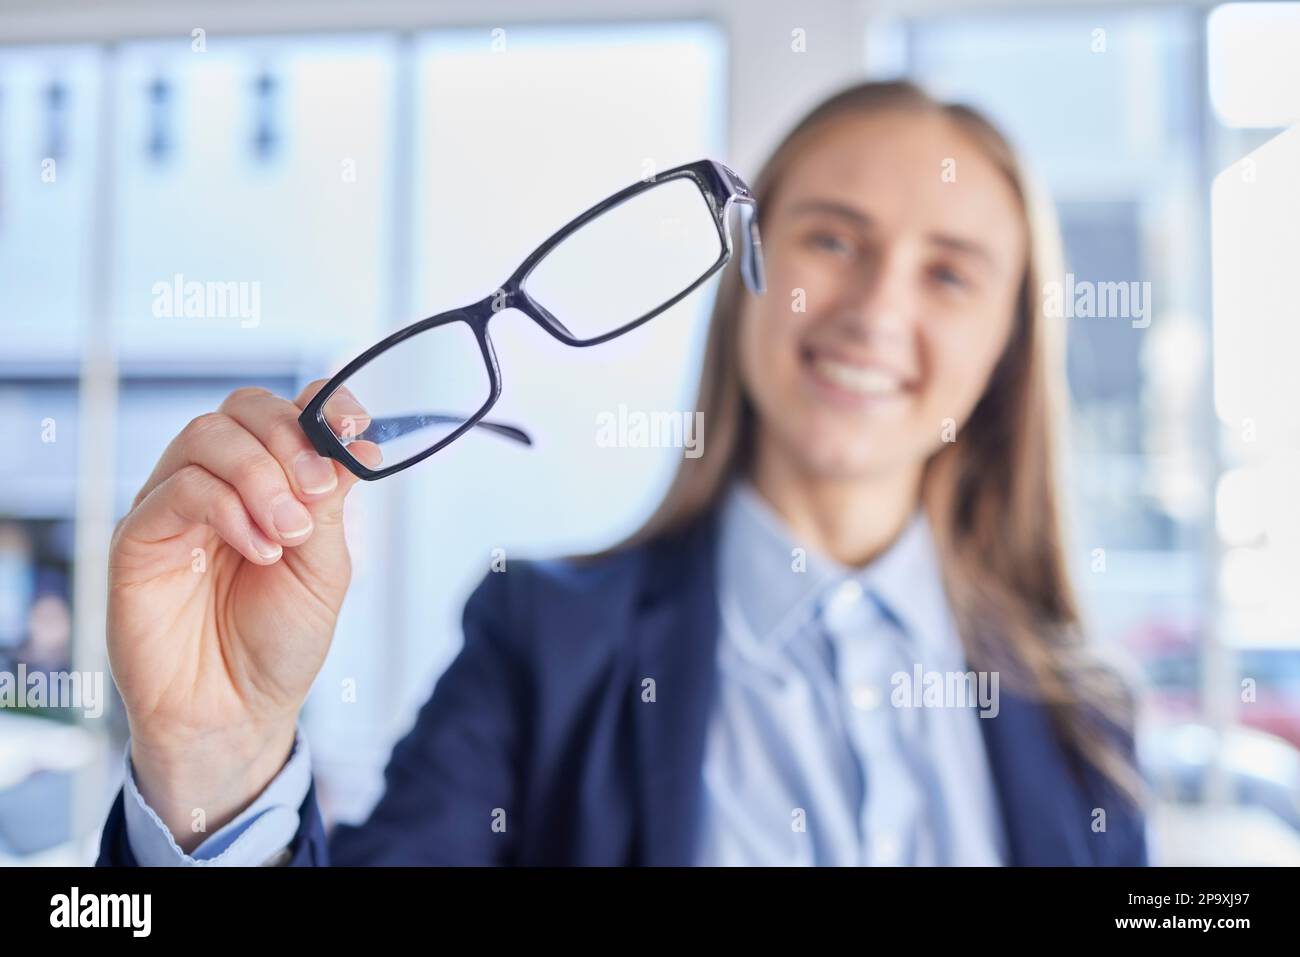 Optometry, eyesight and portrait of woman with spectacles with prescription lens after eye test. Healthcare, vision and female patient or customer Stock Photo